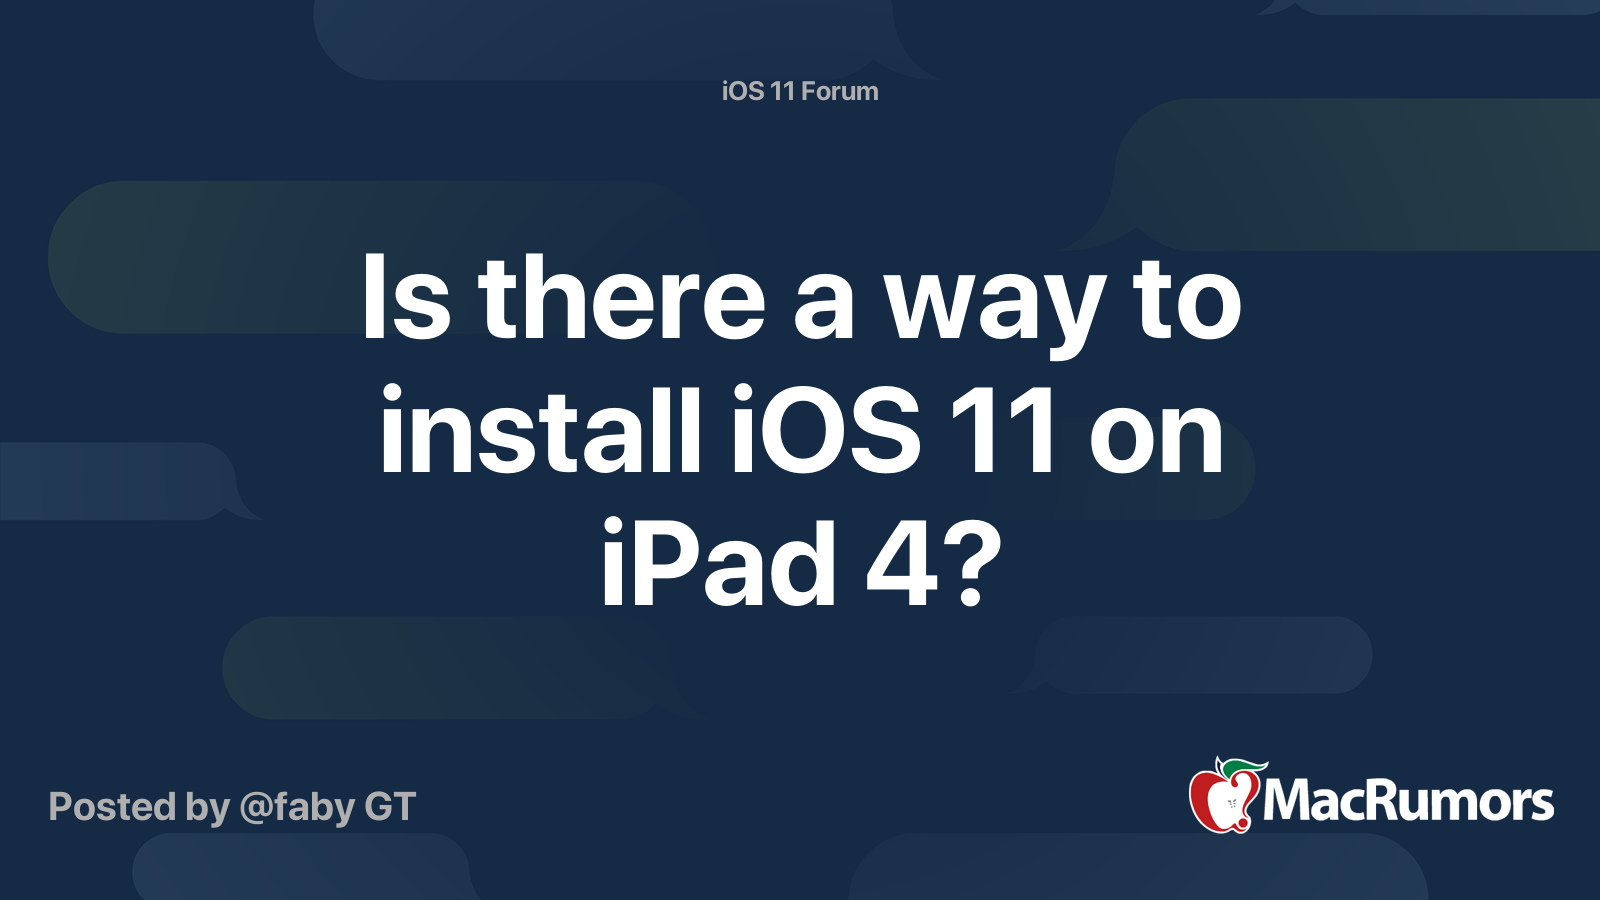 Is there a way to install iOS 11 4? MacRumors Forums